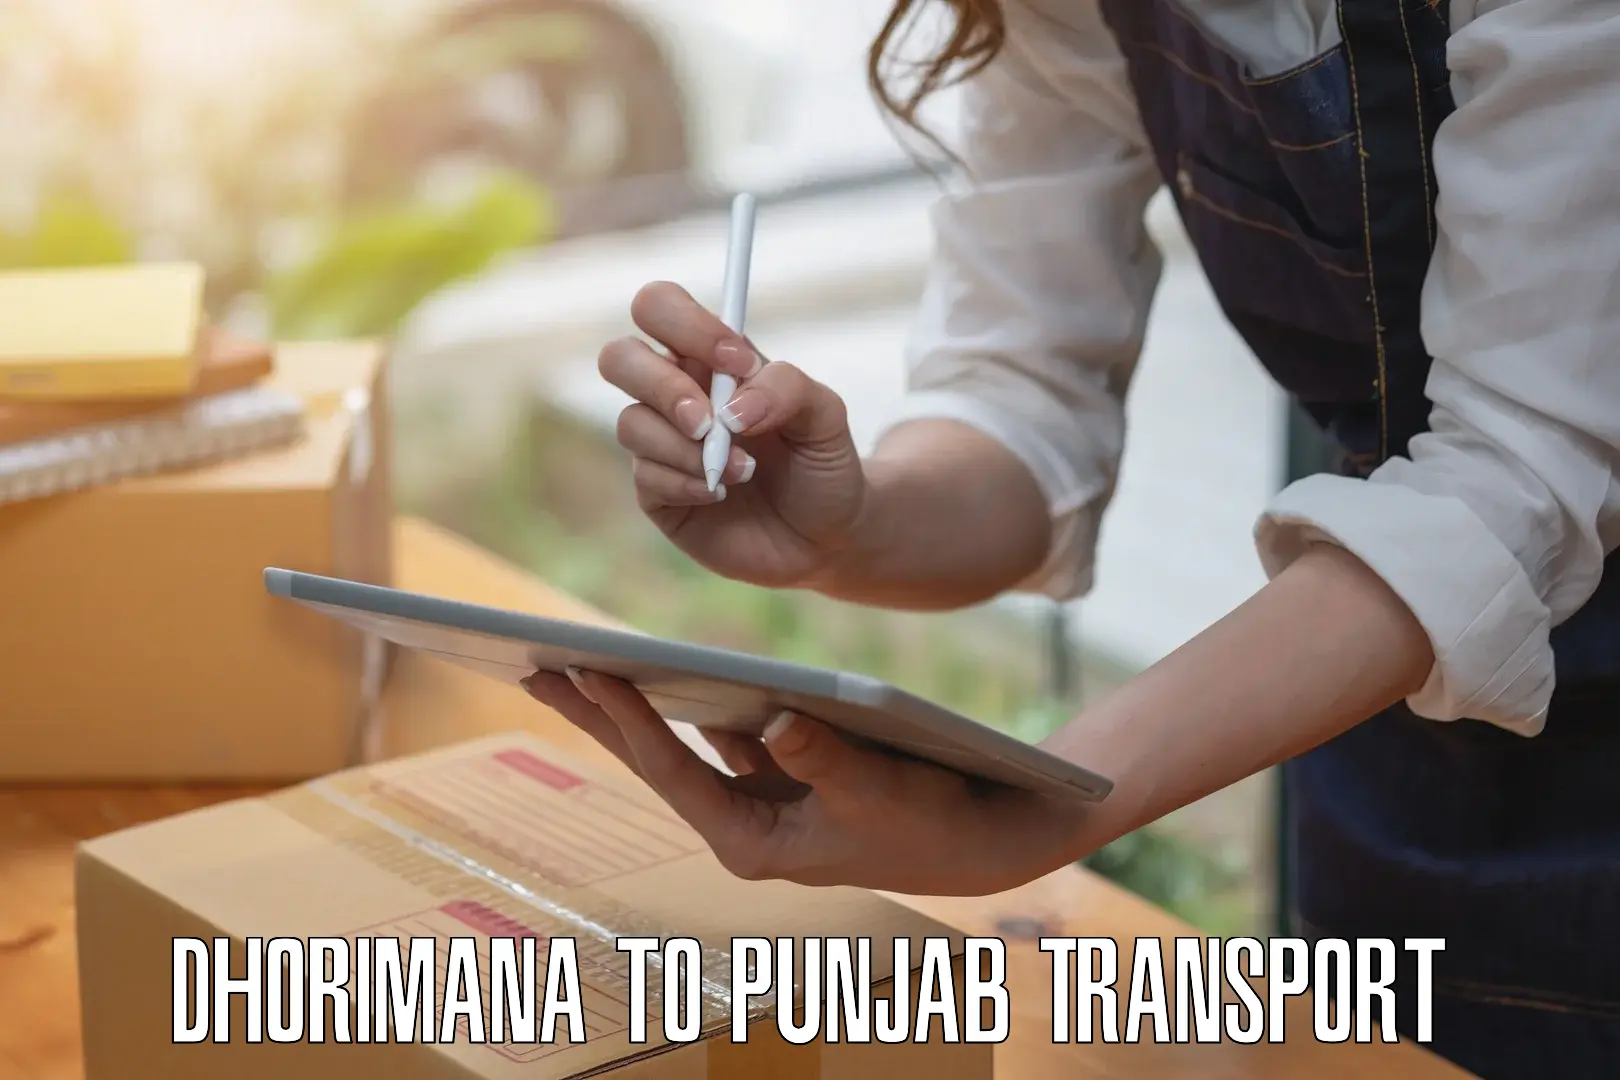 Vehicle transport services in Dhorimana to Sultanpur Lodhi